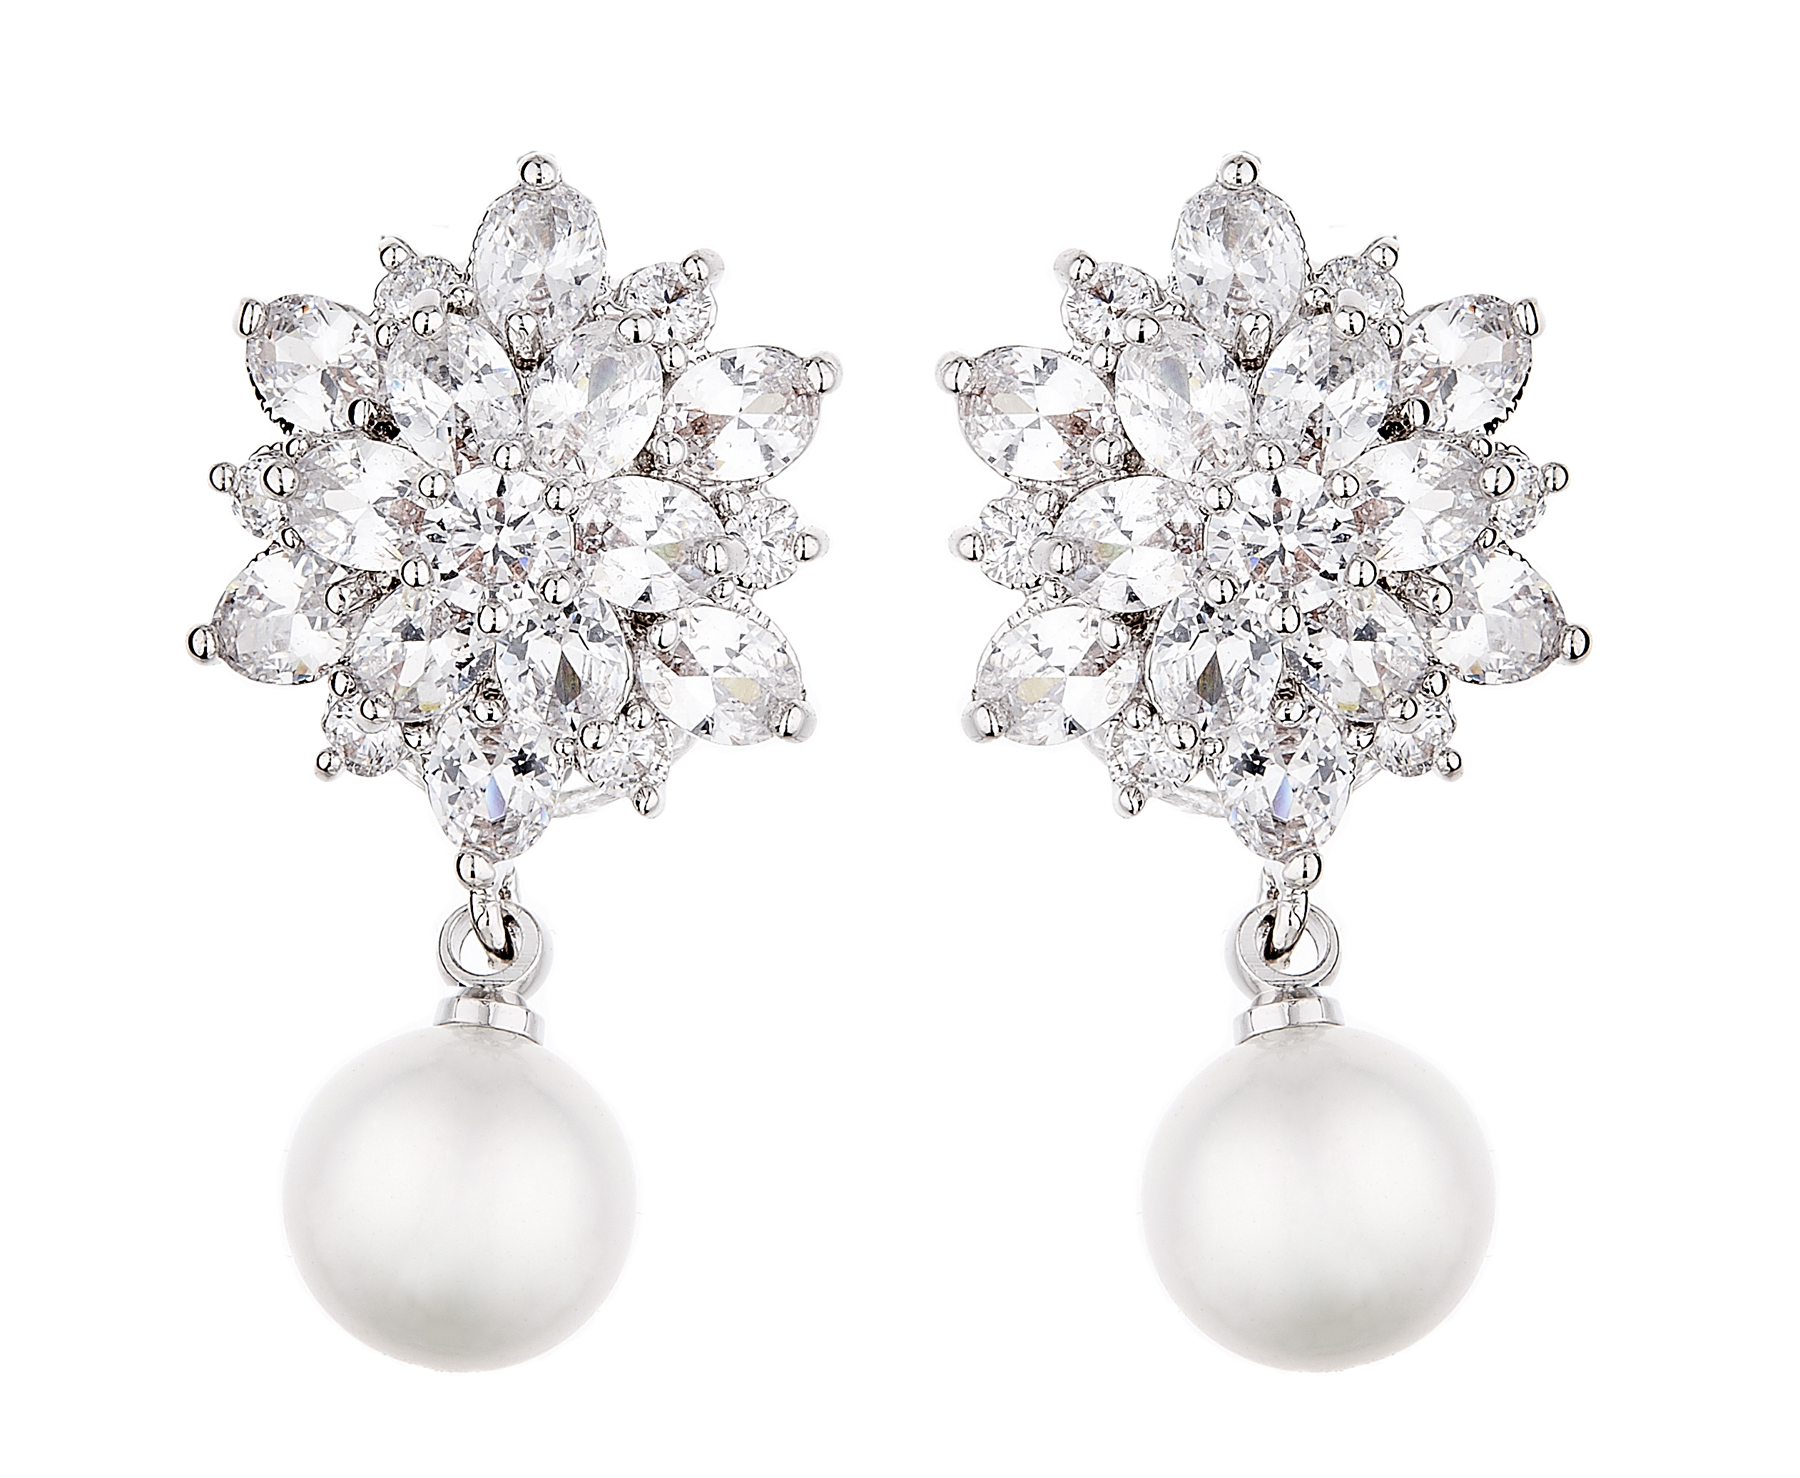 Clip On Earrings - Nancy S - silver luxury drop earring with cubic zirconia stones and a pearl